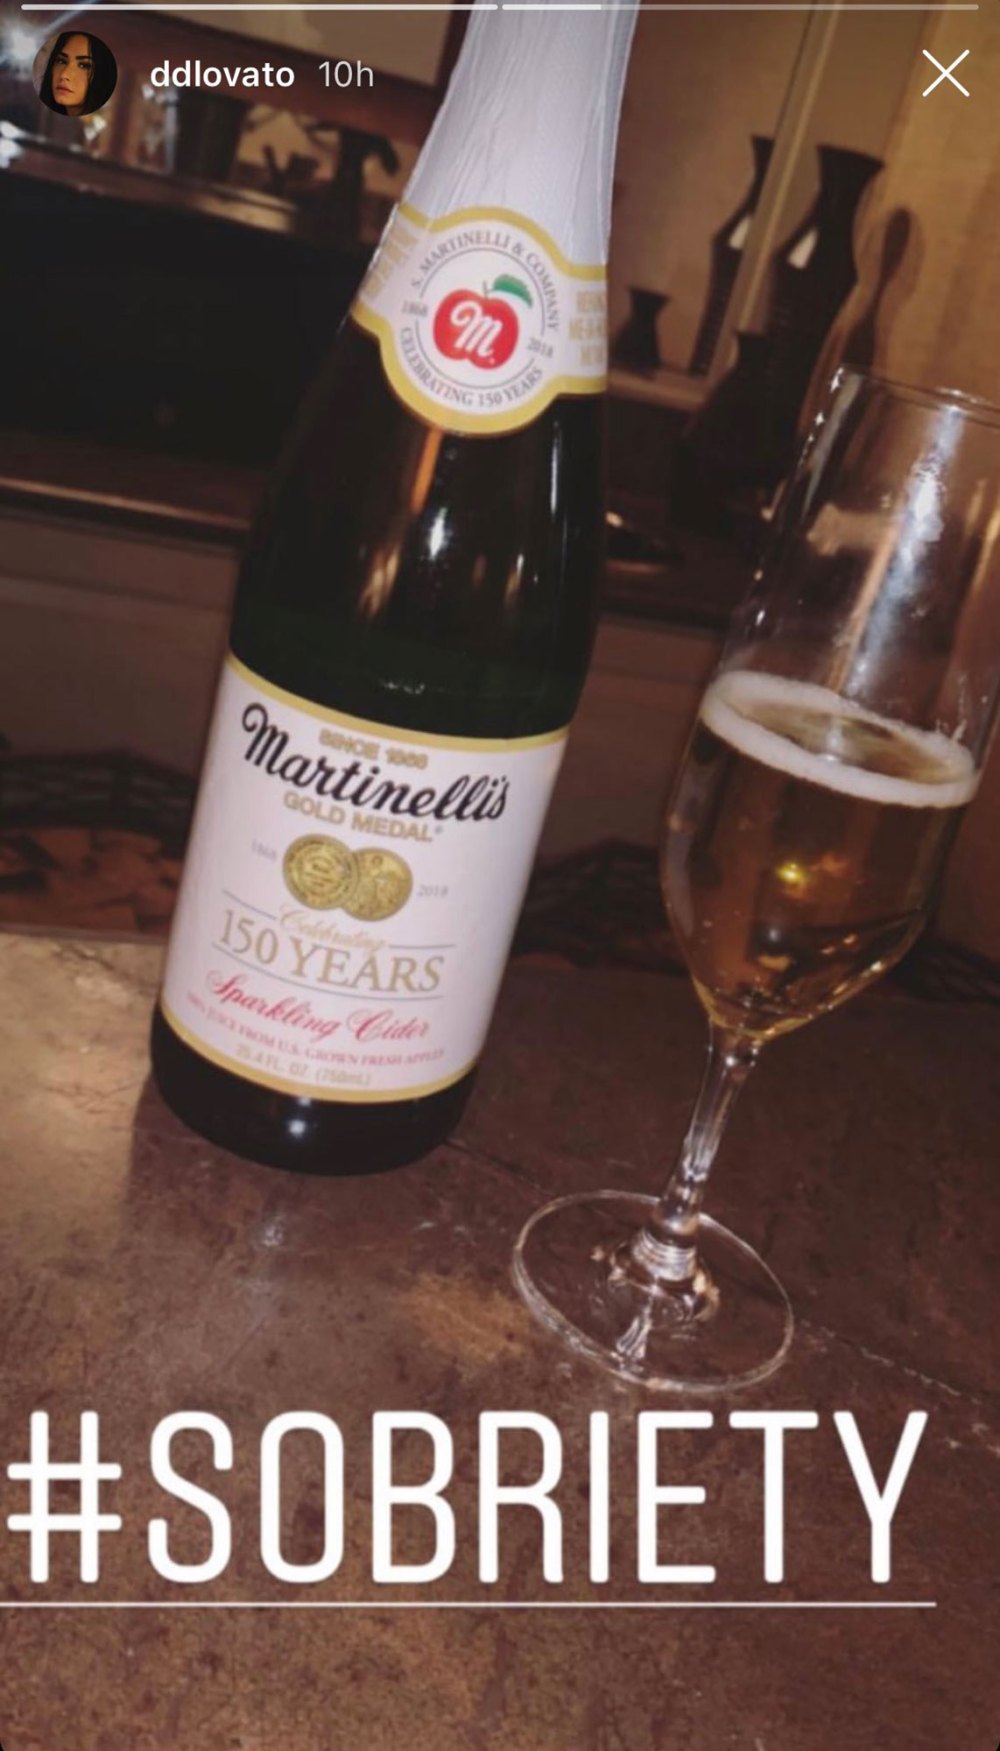 Demi Lovato Drinks Sparkling Cider on New Year’s Eve After Overdose